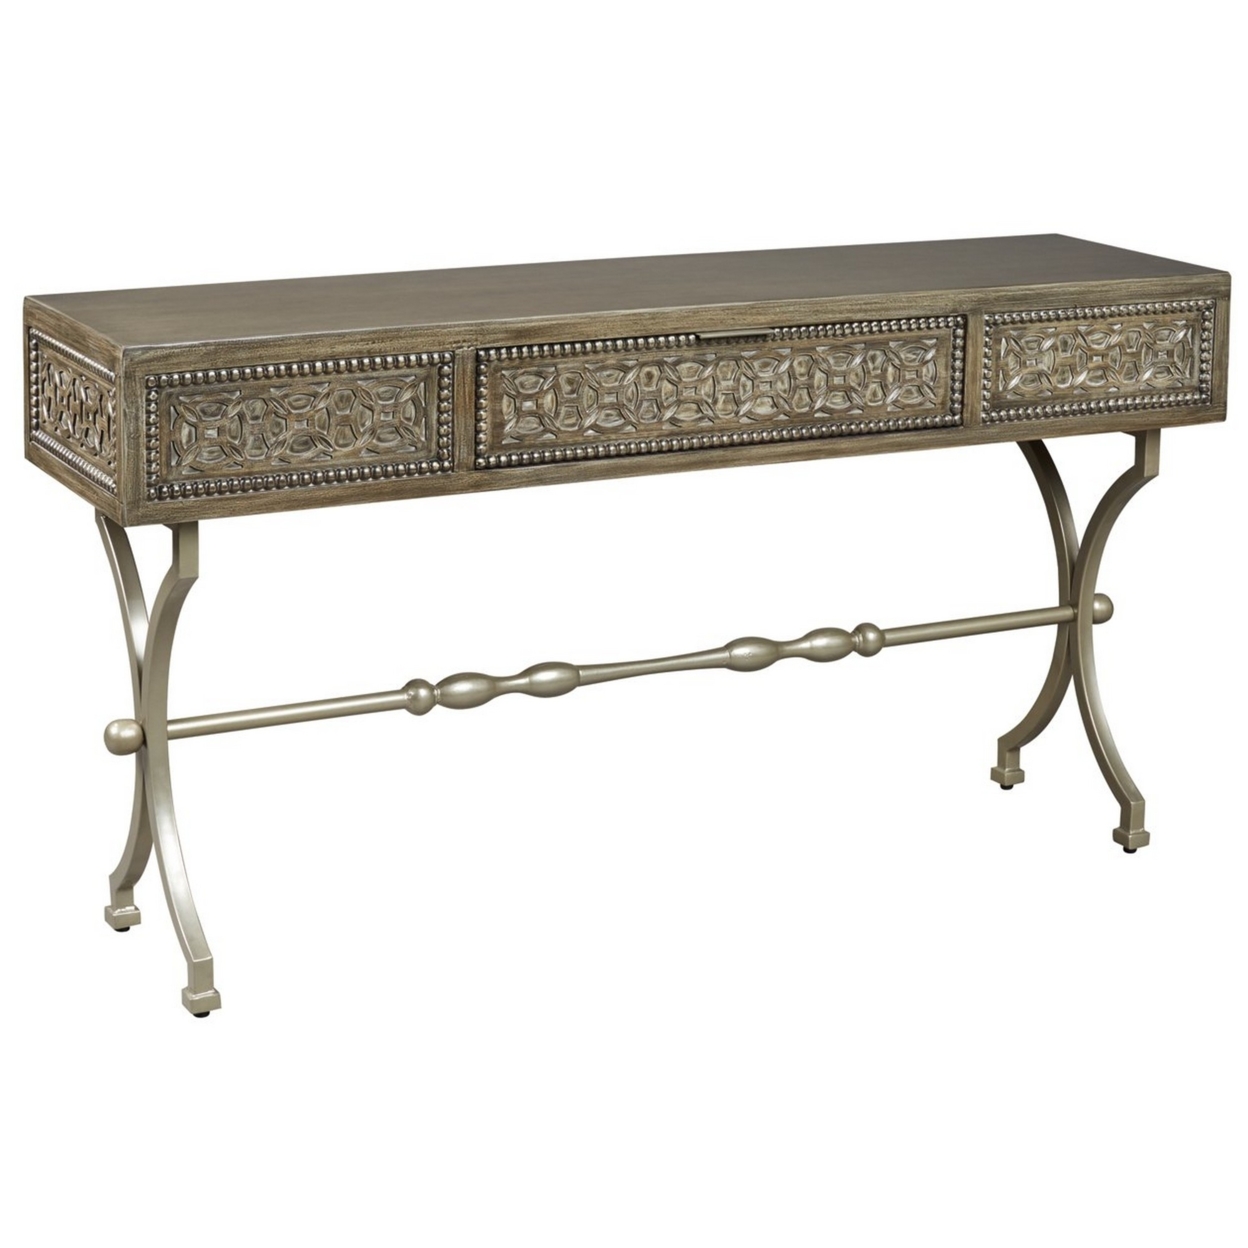 1 Drawer Console Sofa Table With Medallion Pattern And X Shaped Legs, Brown- Saltoro Sherpi